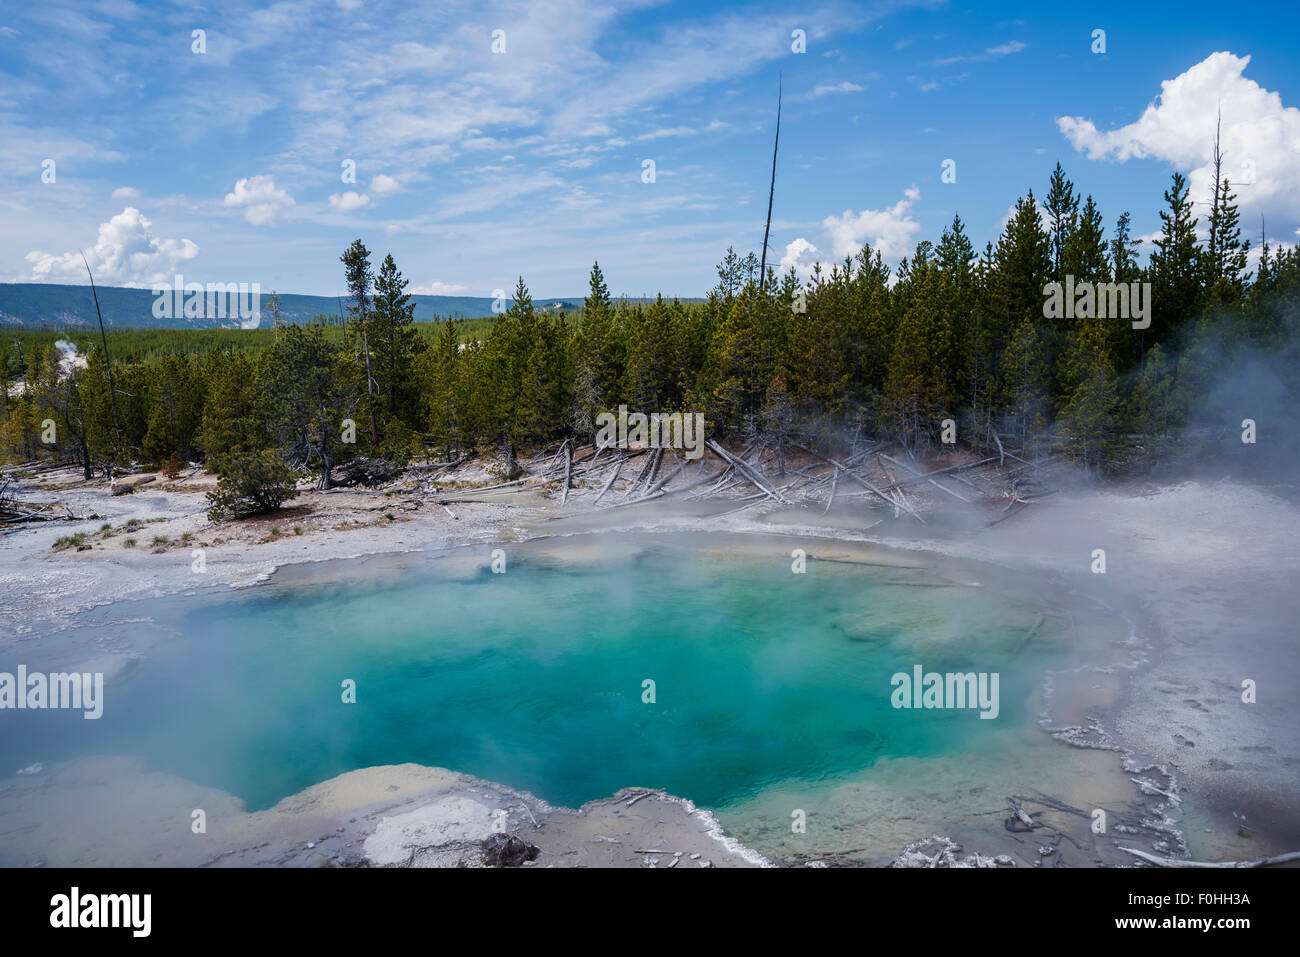 Emerald Spring is a hot spring located in Norris Geyser Basin of Yellowstone National Park, Wyoming, USA. Stock Photo